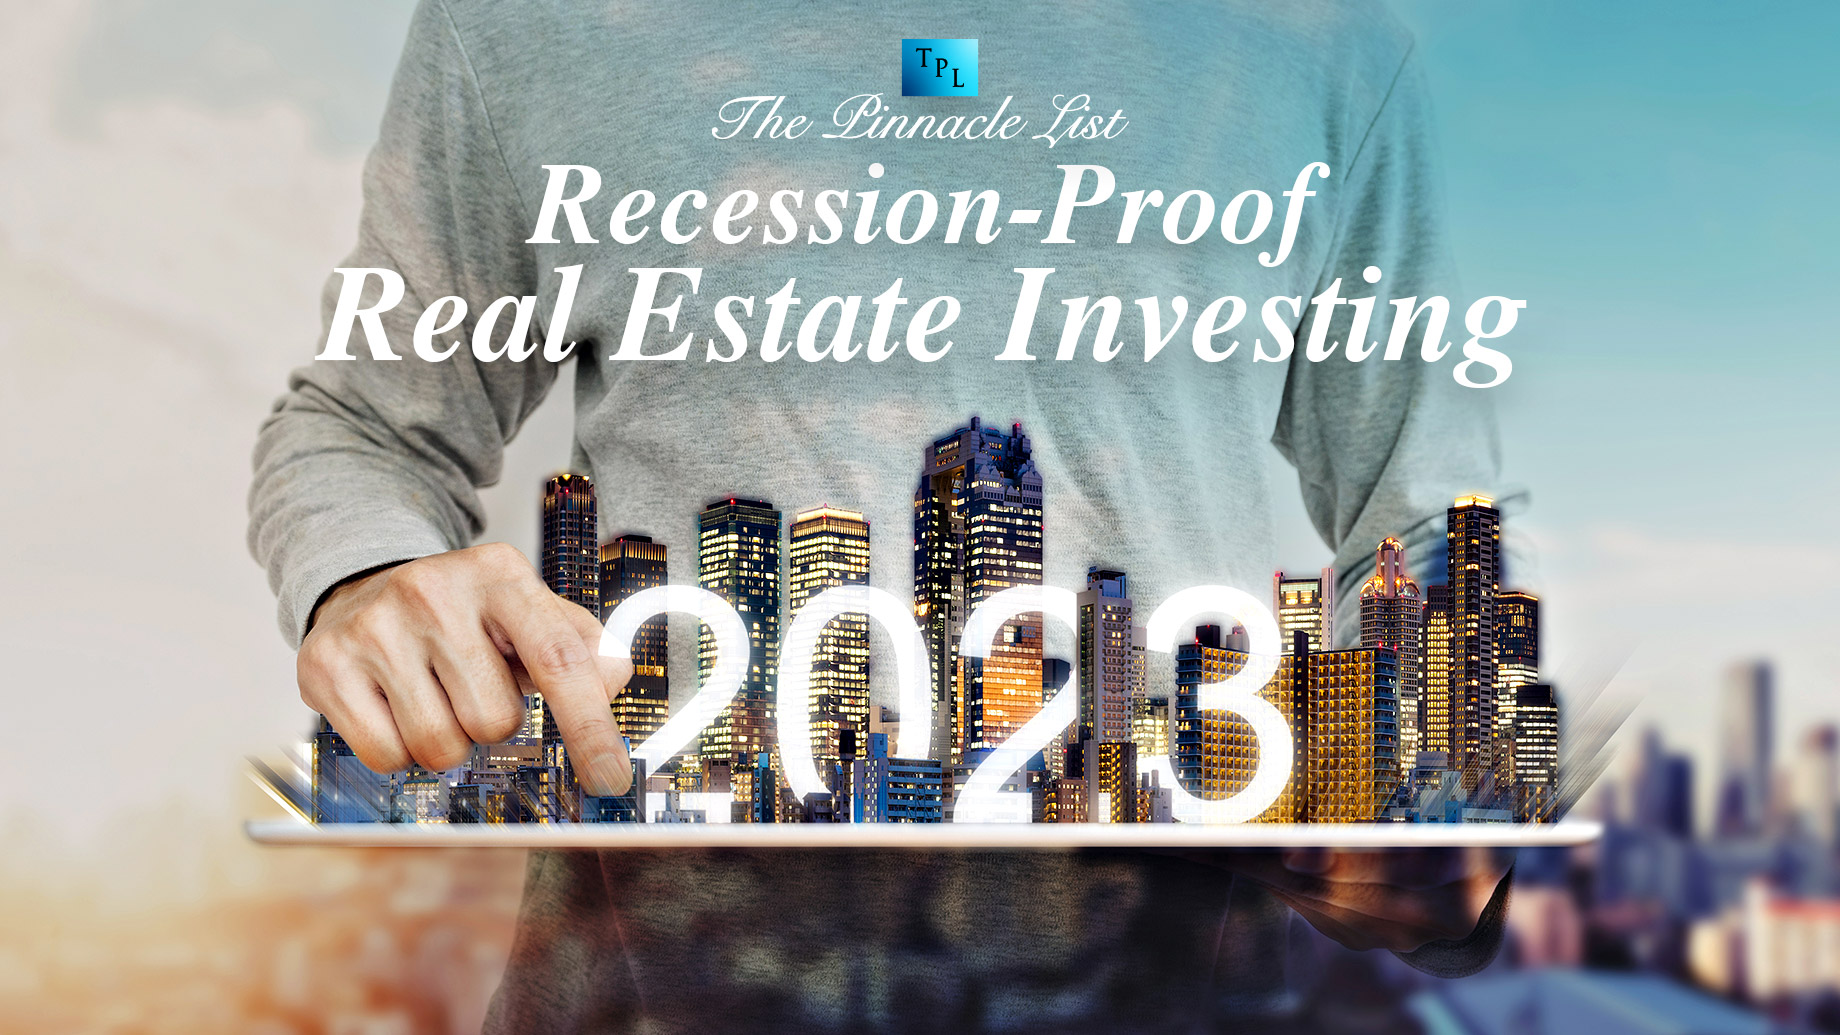 Recession-Proof Real Estate Investing: Is It A Good Idea In 2023?